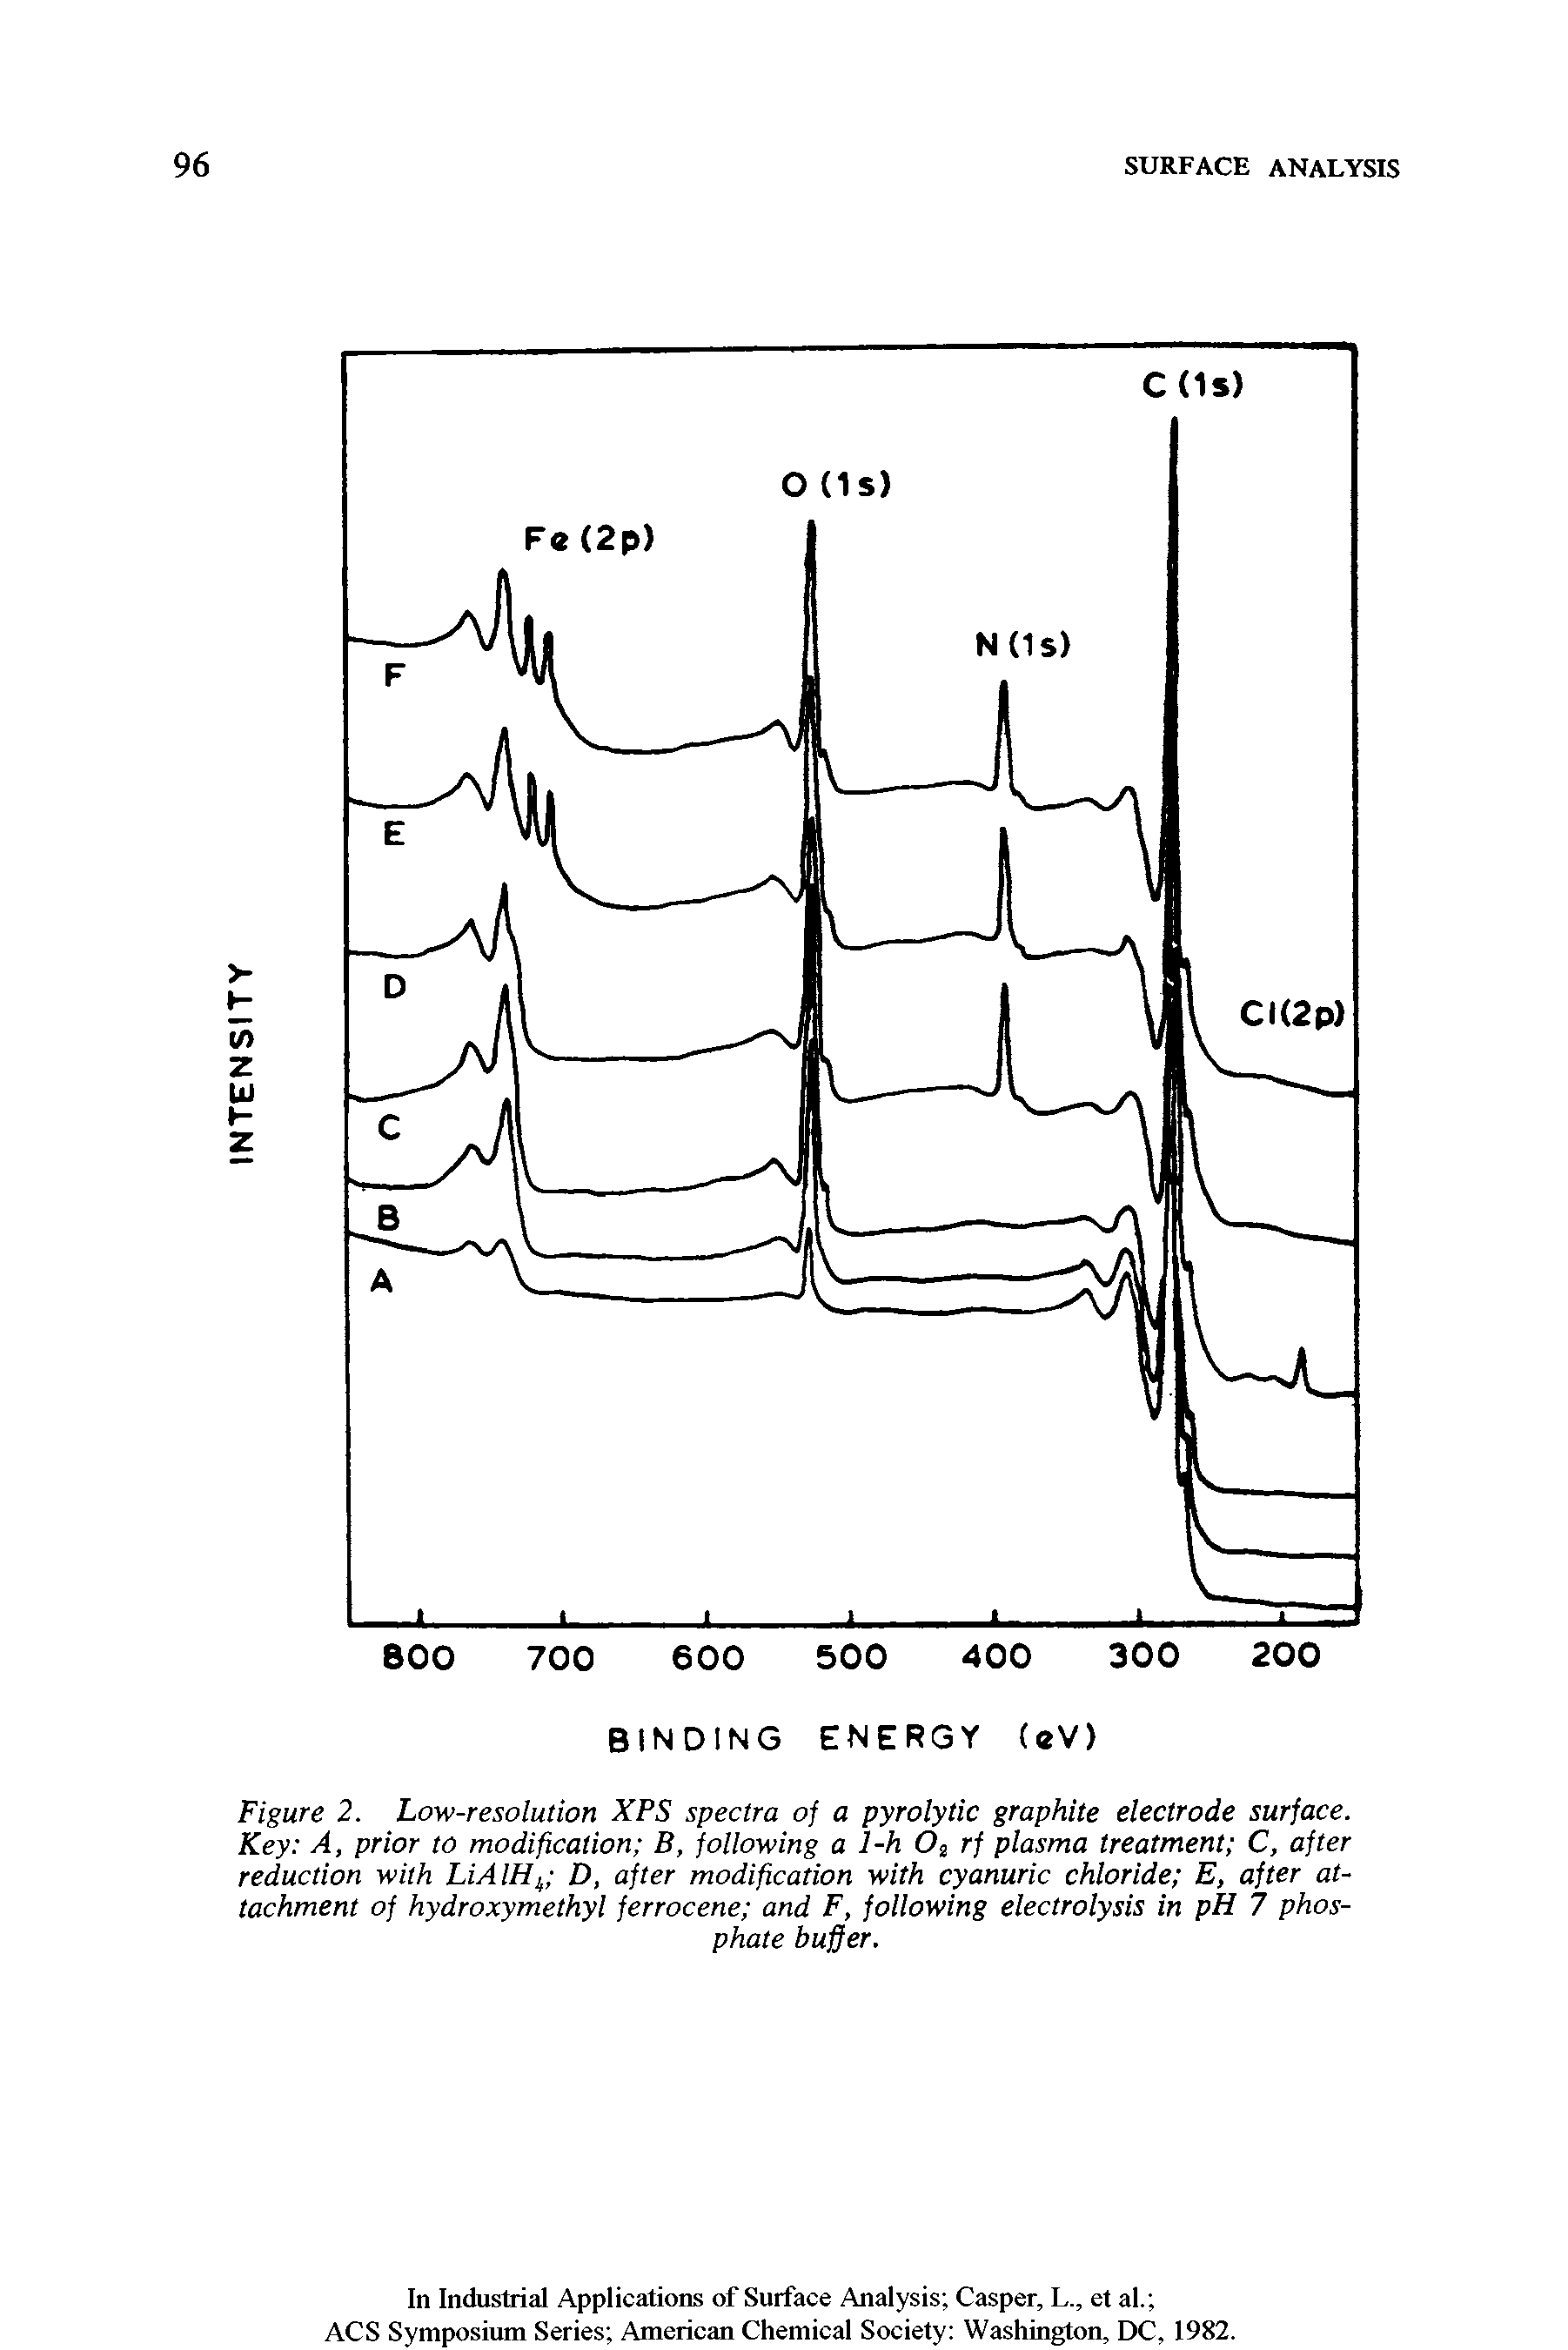 Figure 2. Low-resolution XPS spectra of a pyrolytic graphite electrode surface. Key A, prior to modification B, following a l-h 02 rf plasma treatment C, after reduction with LiAlHi D, after modification with cyanuric chloride E, after attachment of hydroxymethyl ferrocene and F, following electrolysis in pH 7 phosphate buffer.